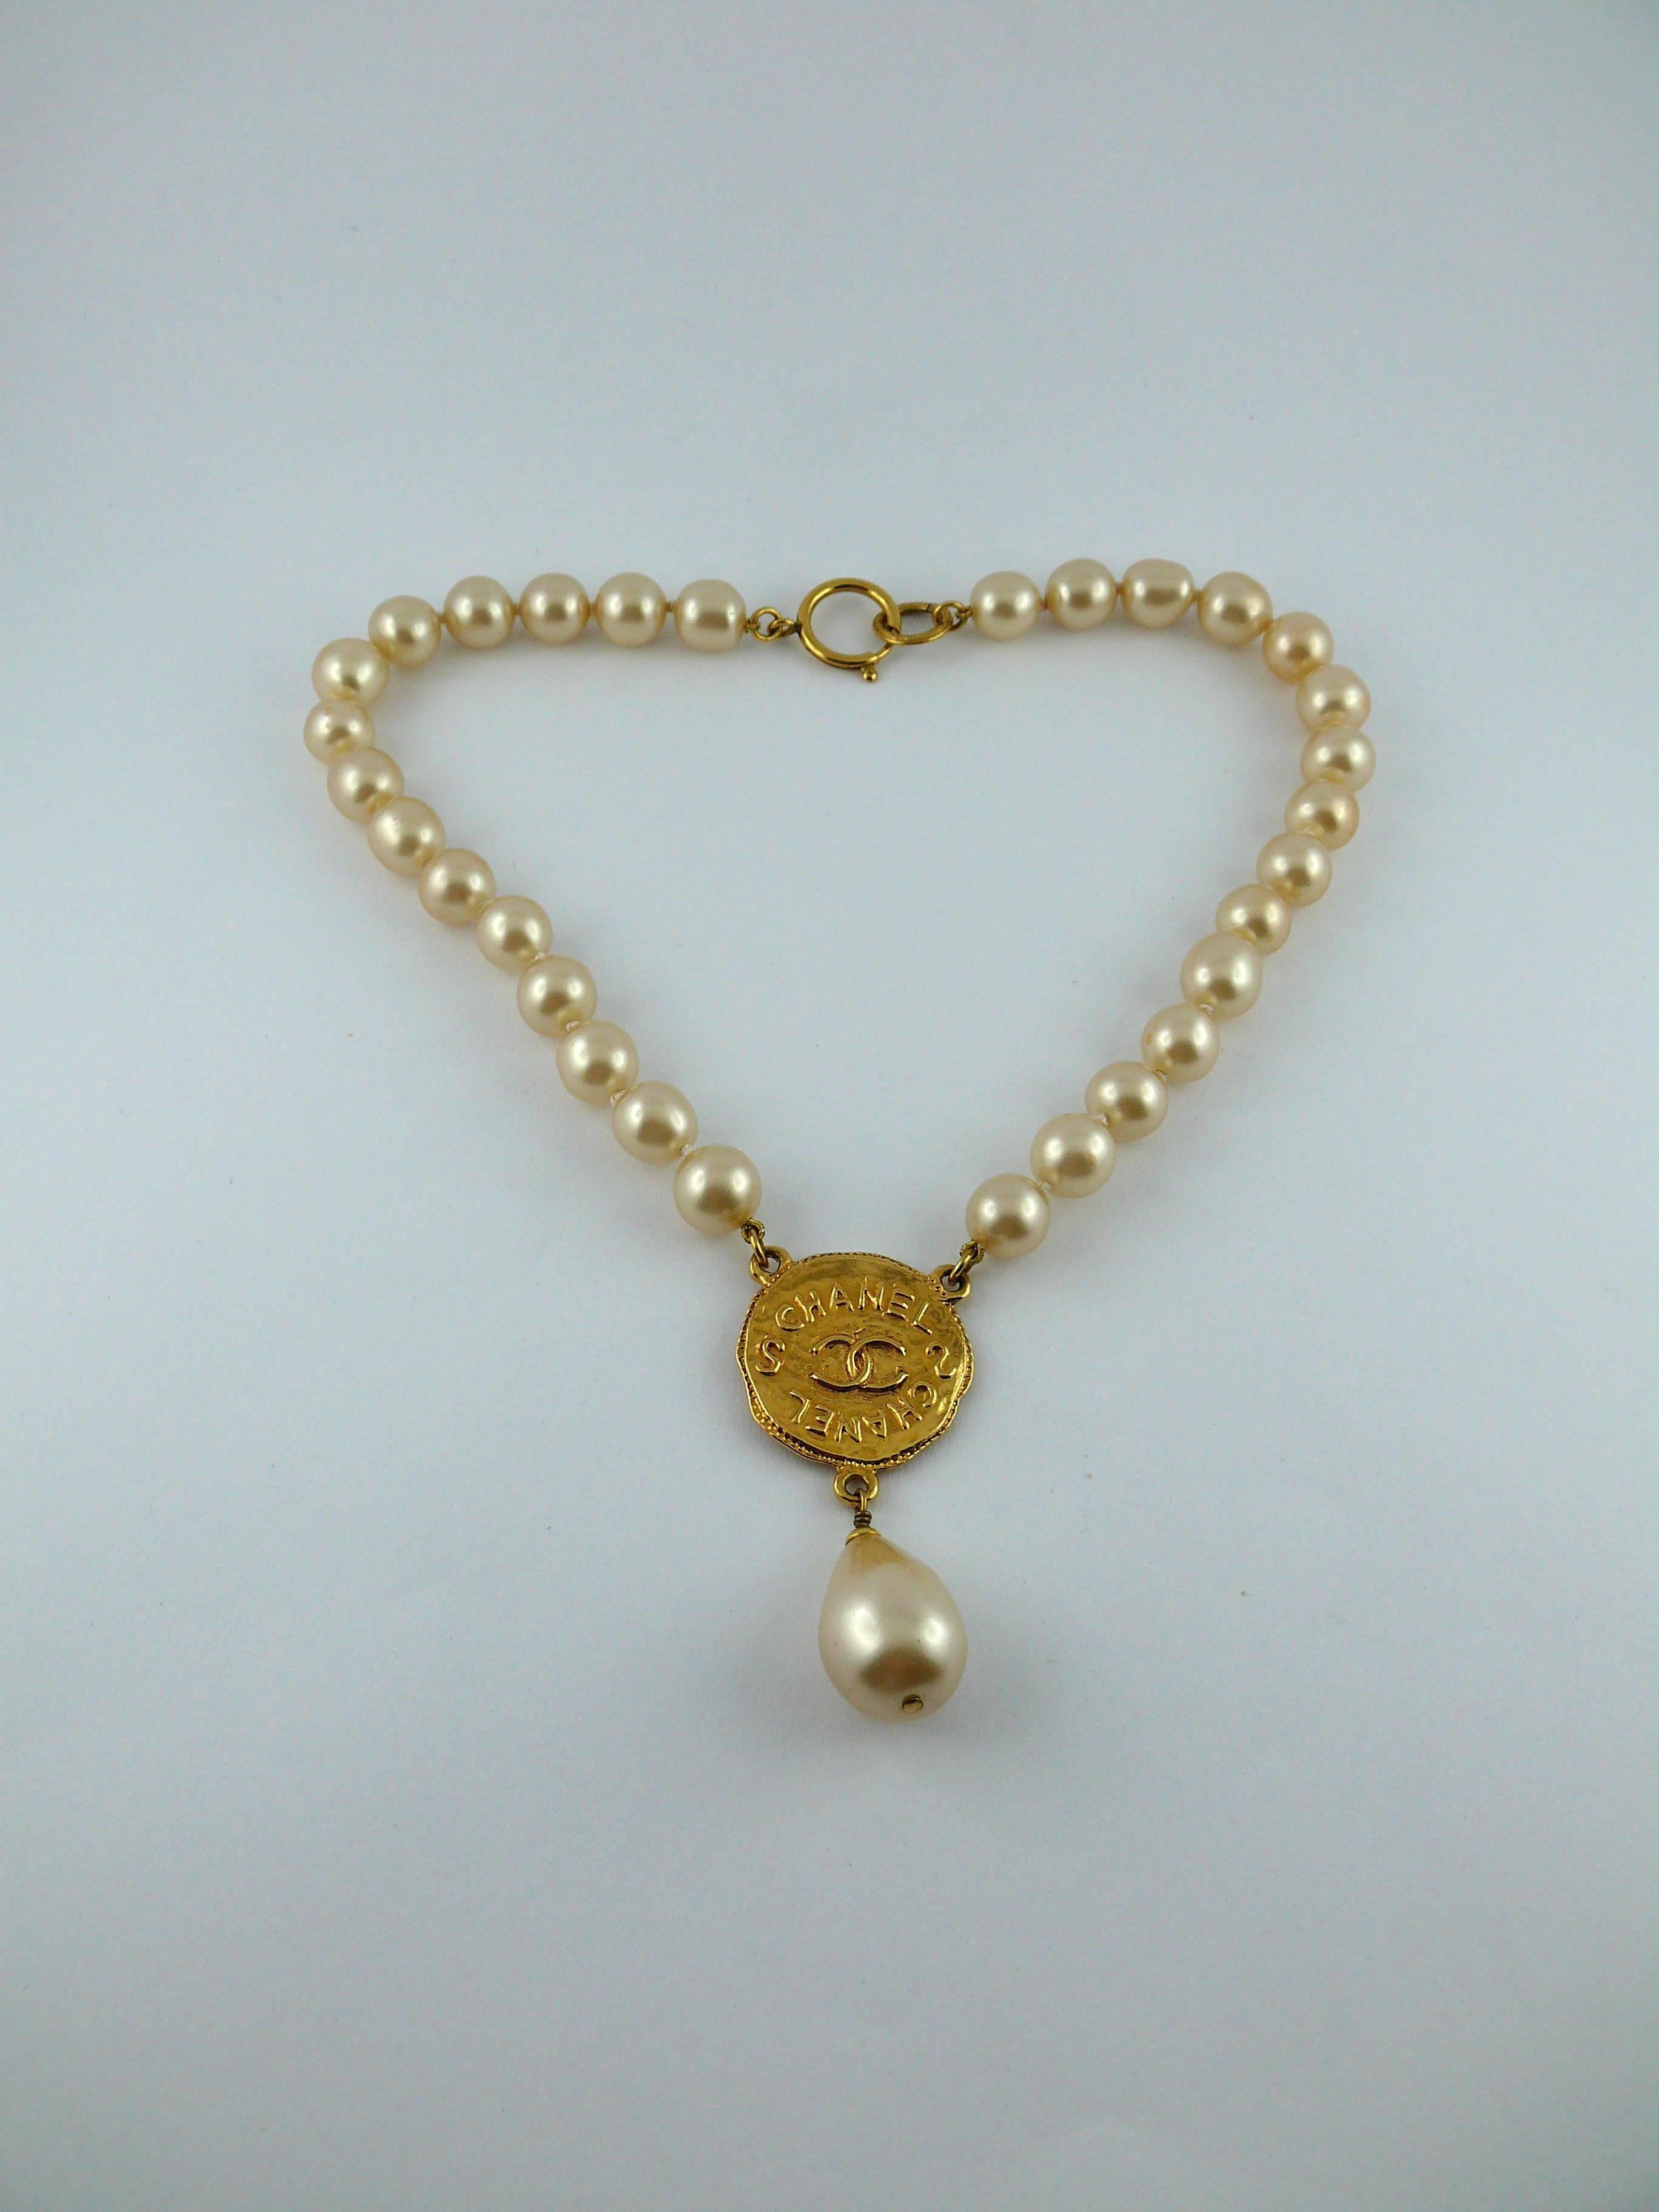 CHANEL vintage faux pearl necklace featuring a gold tone textured CC logo medallion and a large faux pearl tear drop.

Spring clasp closure.

Marked CHANEL 94 A Made in France.

Indicative measurements : length approx. 45 cm (17.72 inches) / coin